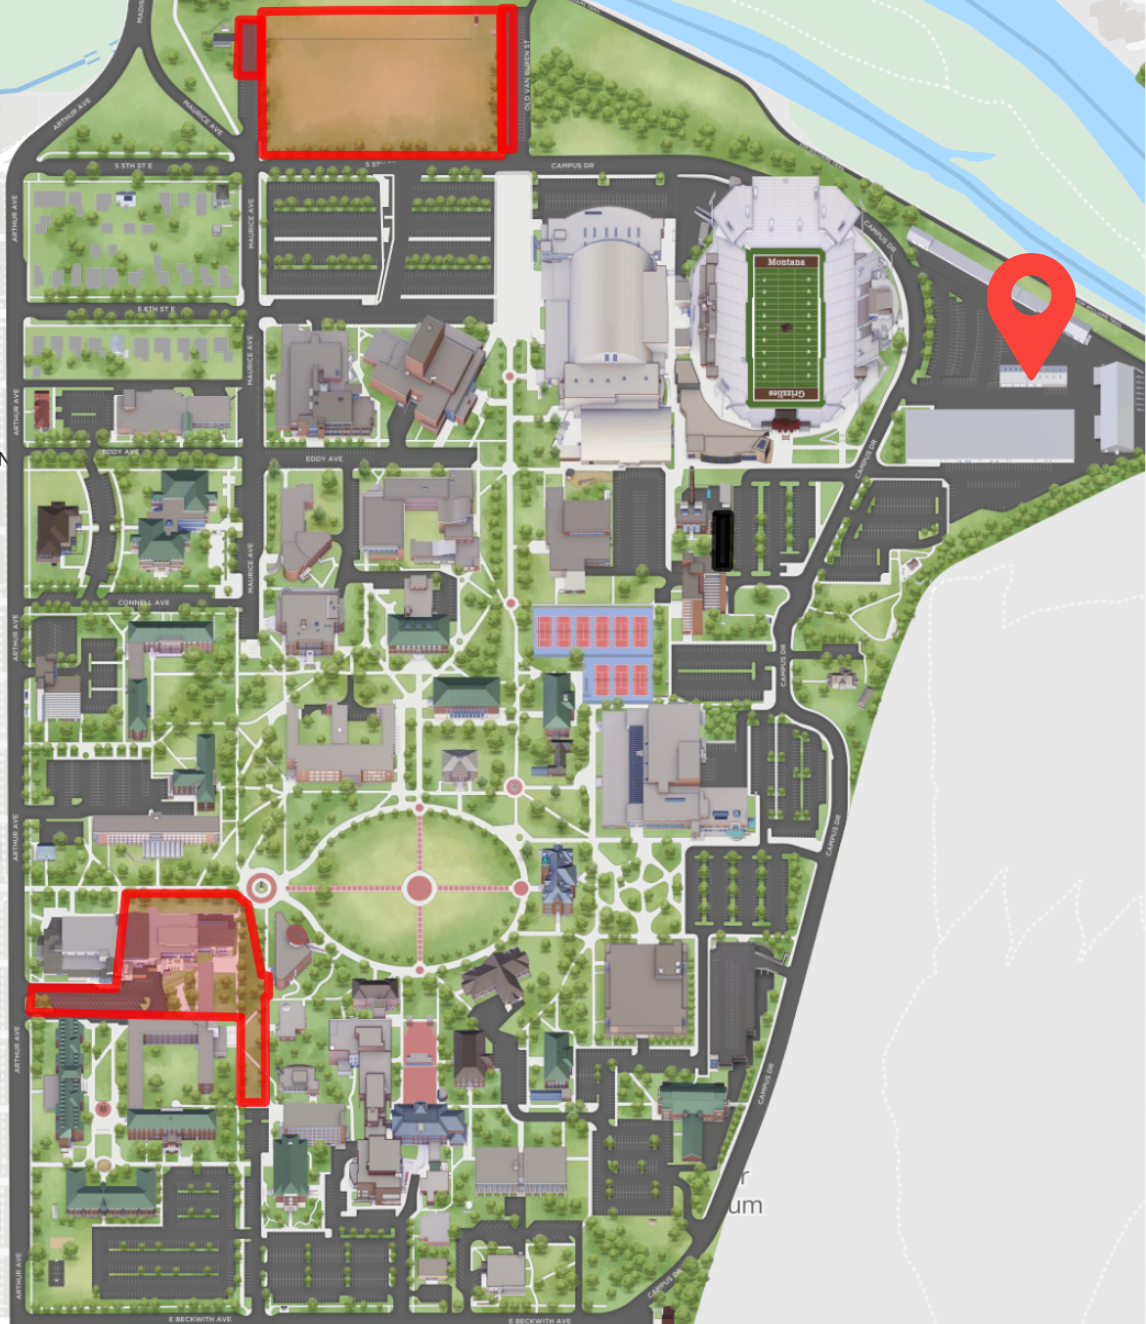 Map of UM with Bike garage highlighted in red